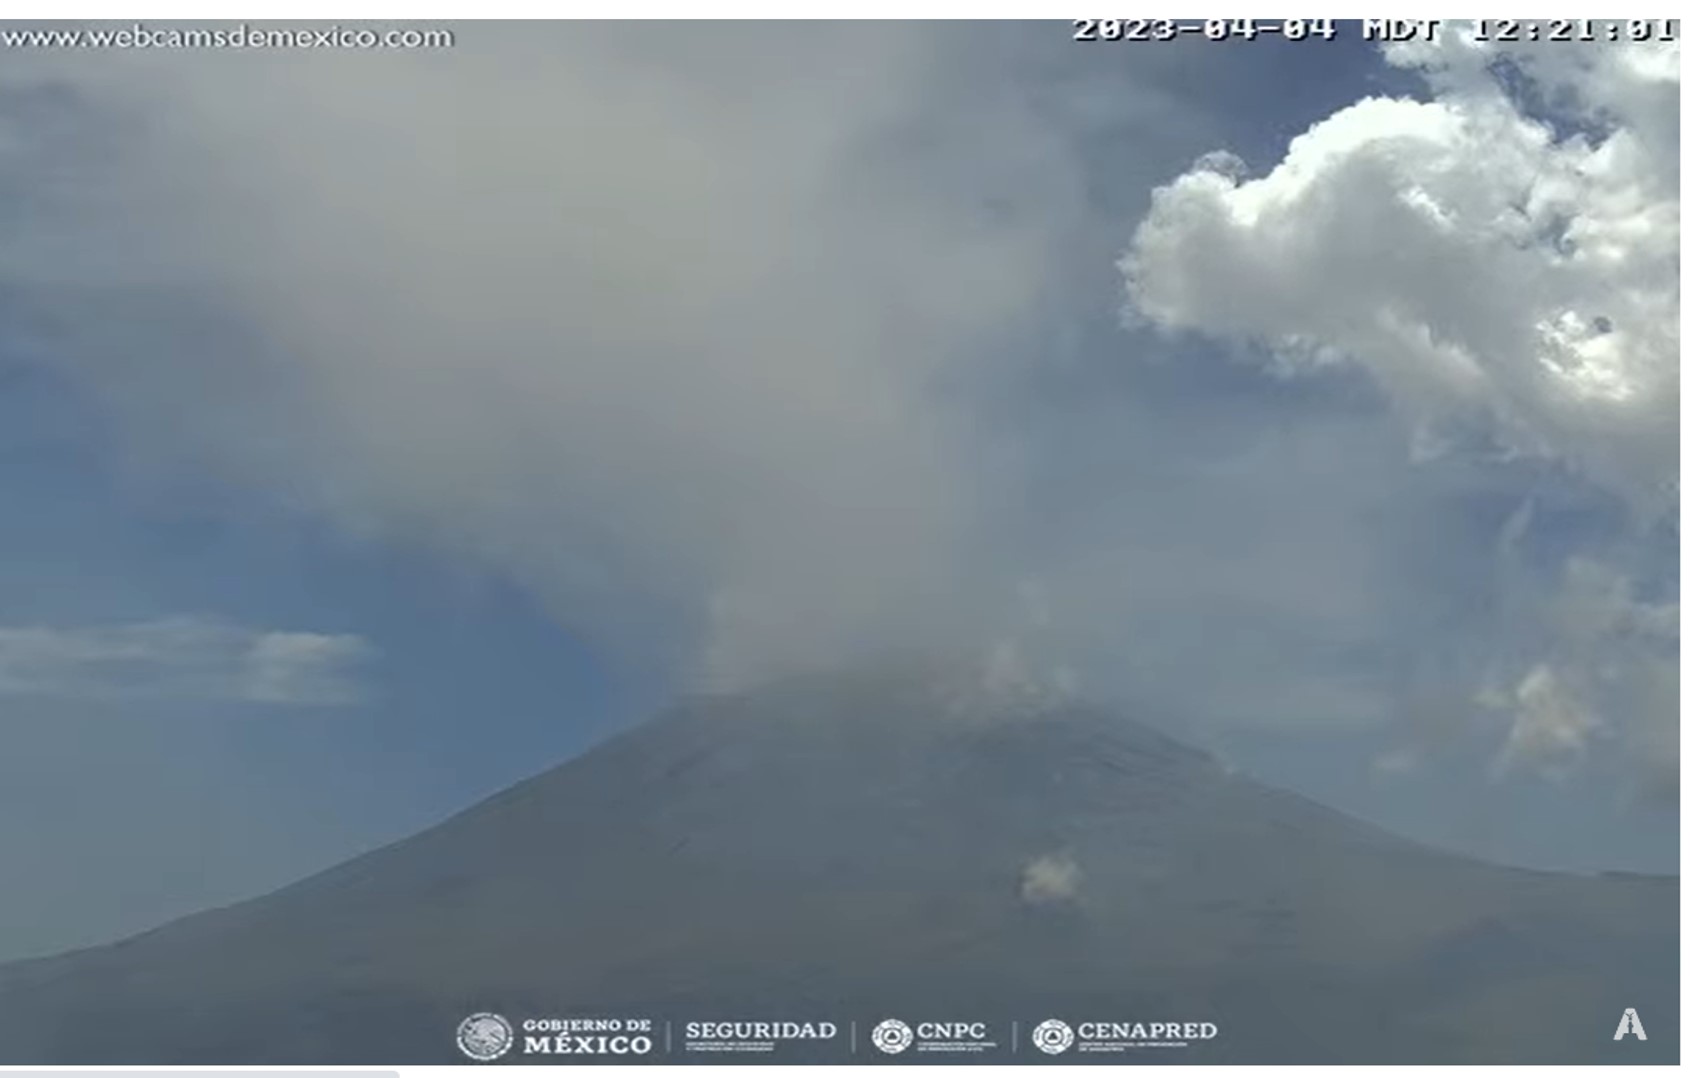 This is how the explosions of the volcano looked (photo: Webcams of Mexico / Twitter)